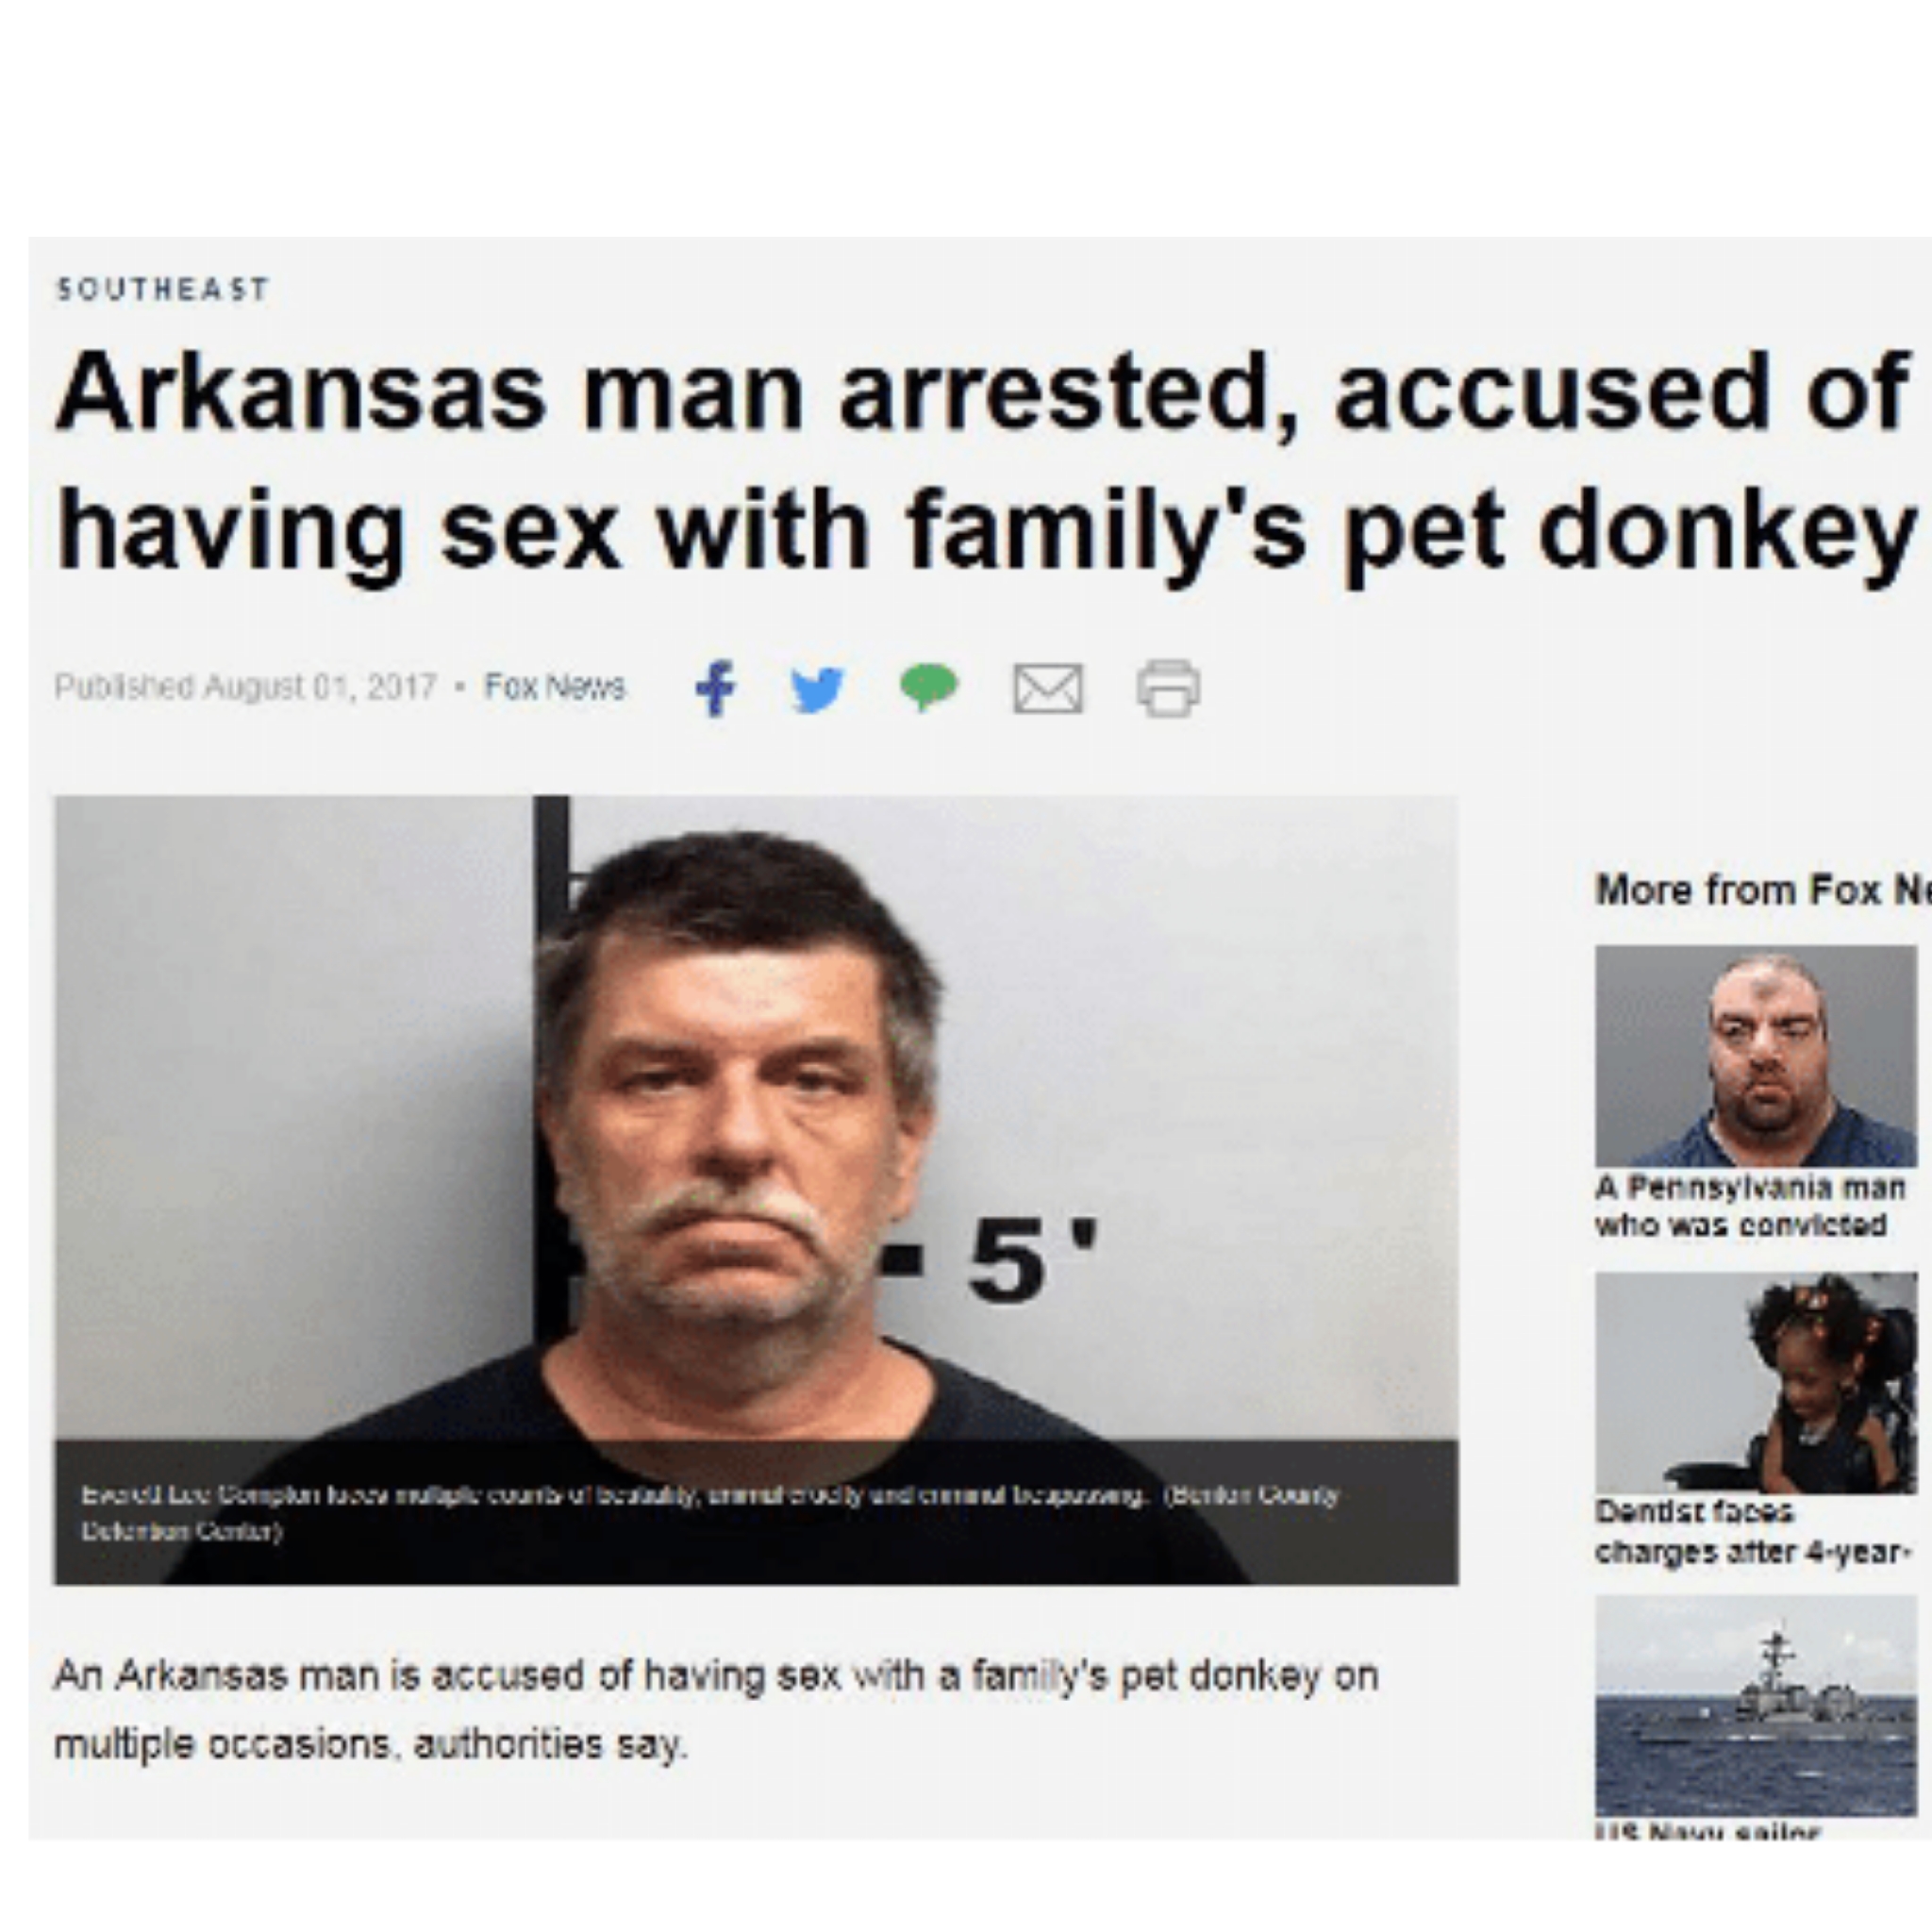 florida man 16 august - Southeast Arkansas man arrested, accused of having sex with family's pet donkey P Aulio, 2017. Foxws More from Fox Ne A Pennsylvania man who was convicted tad La Lu n a Seminarak Dendst tacos charges after 4year An Arkansas man is 